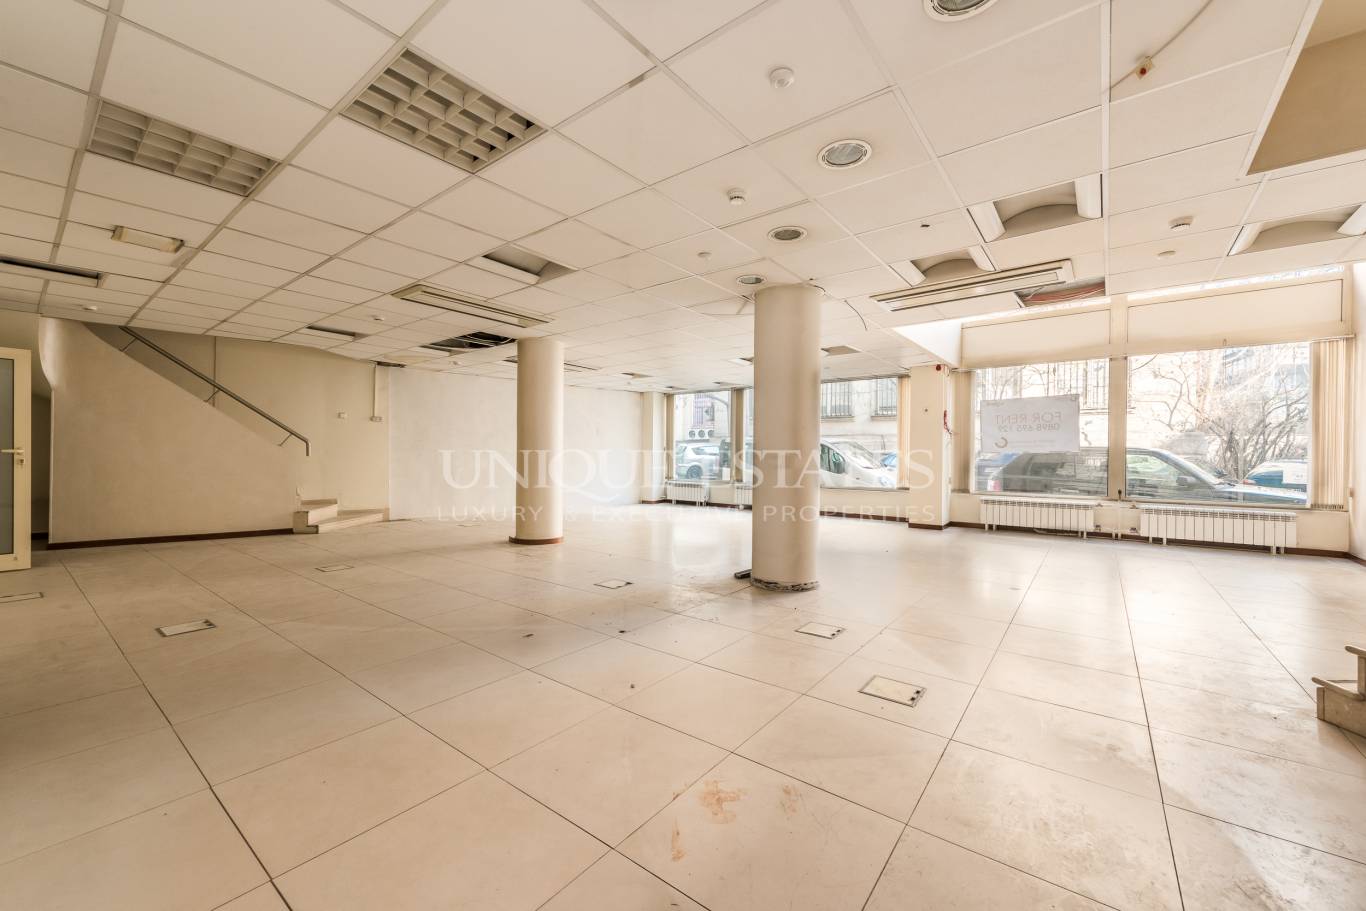 Commercial property for rent in Sofia, Downtown with listing ID: K8834 - image 2